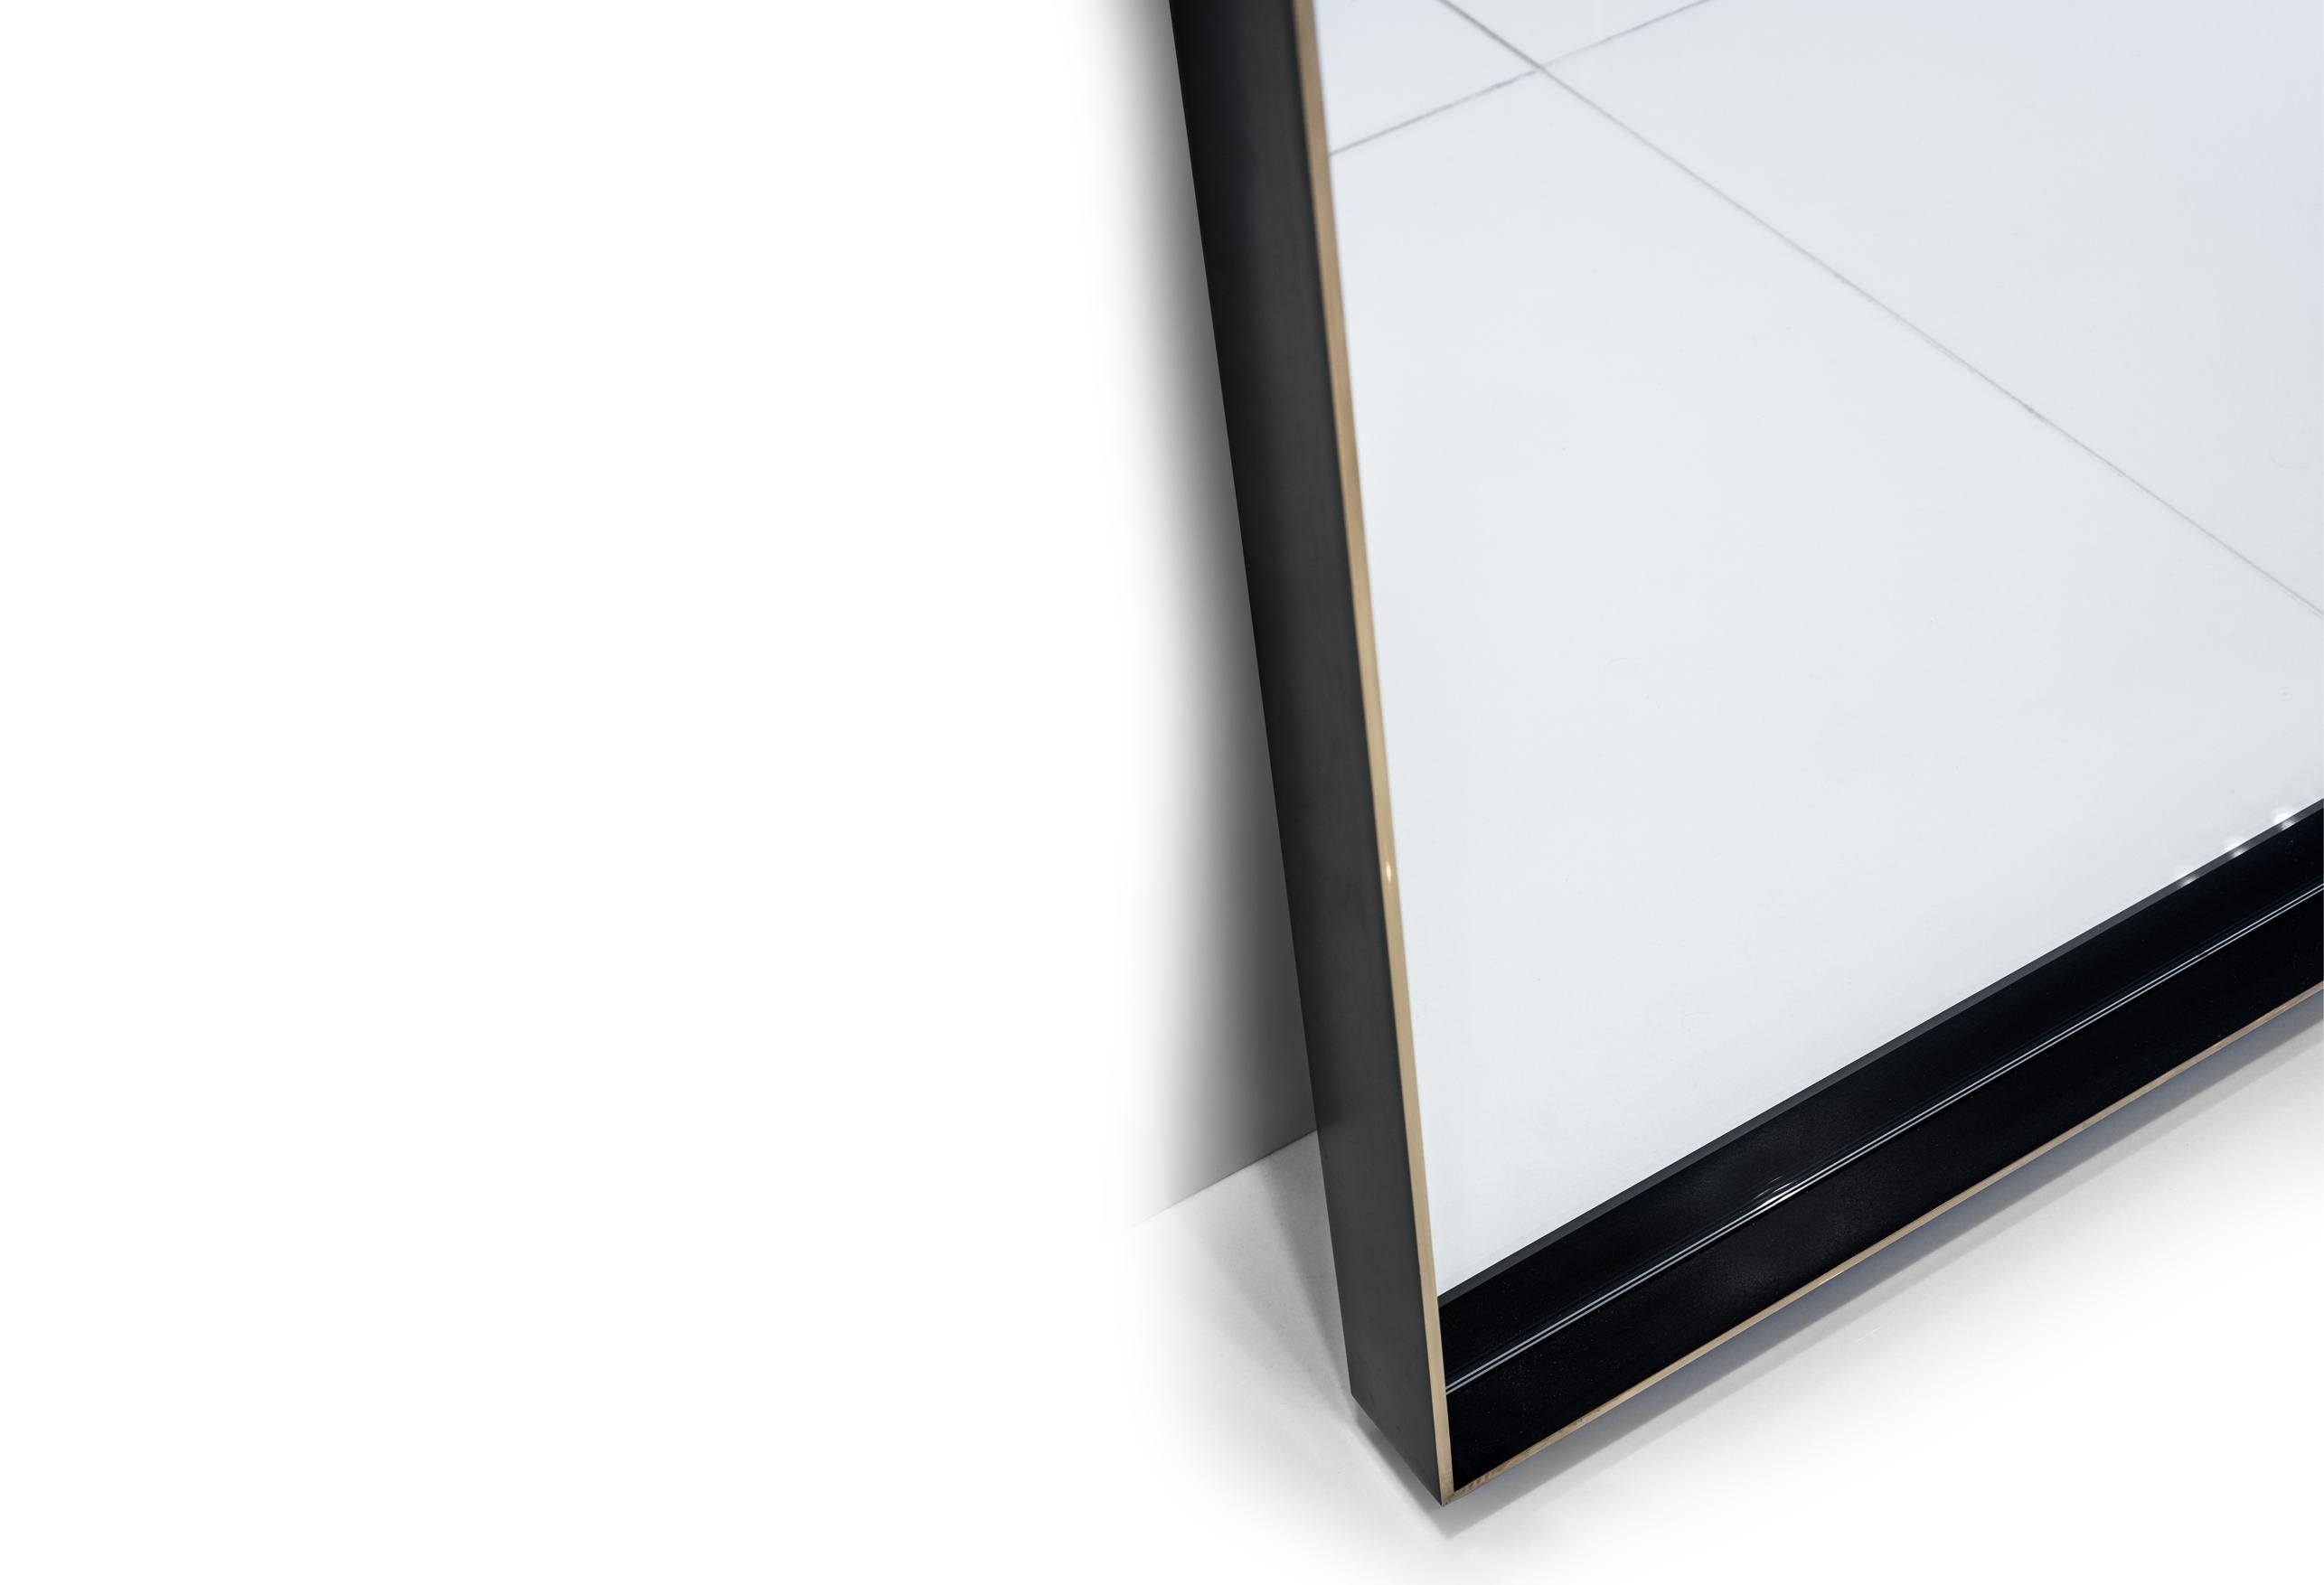 The simple purity of the Rone Floor Mirror means it pairs beautifully with any piece in any setting. 

Shown with a solid Brass frame with patinated sides and burnished edges.

This is a natural product that may have slight imperfections. This is